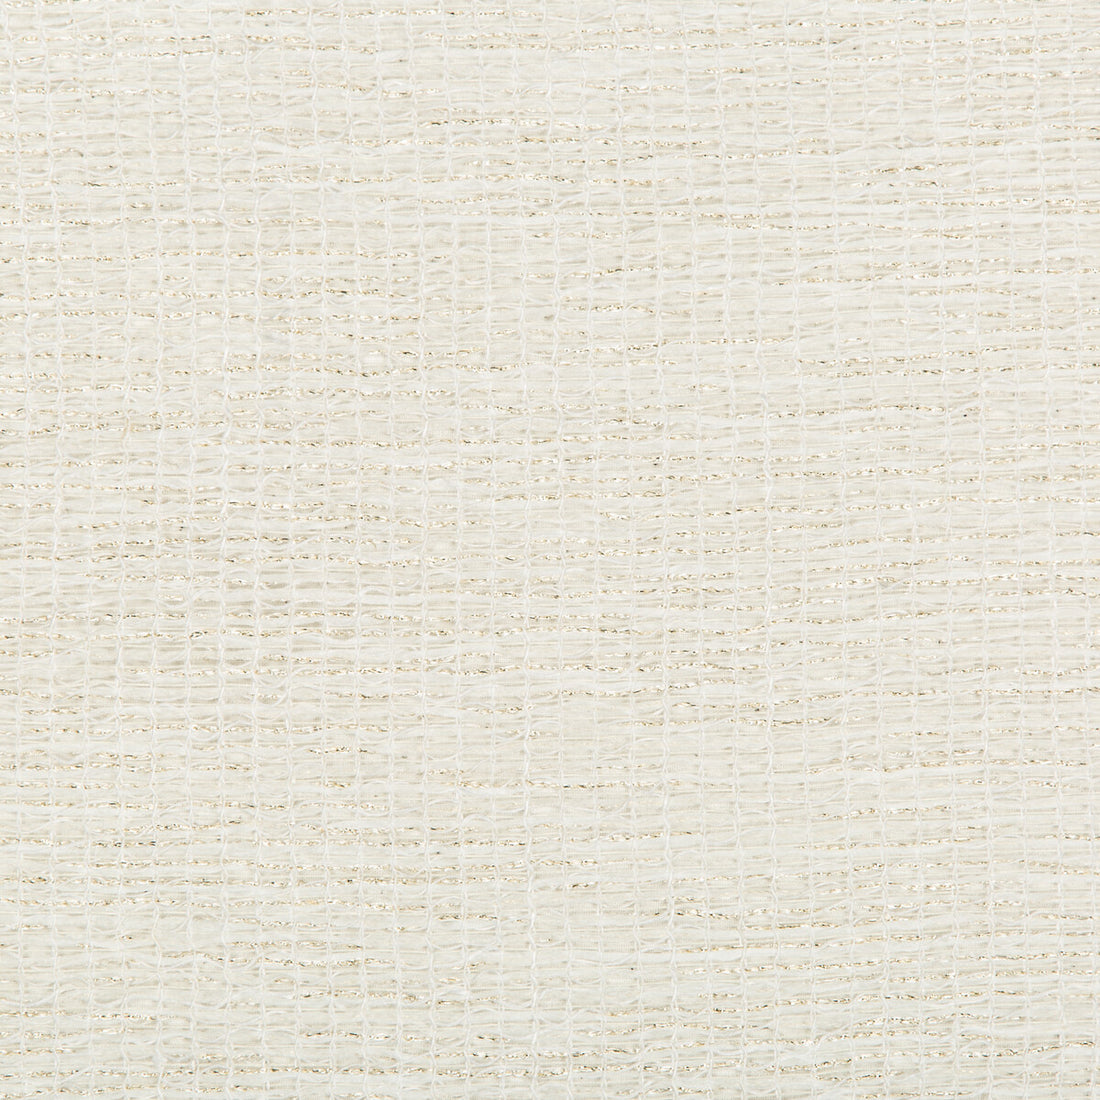 Quiescent fabric in ivory color - pattern 4461.1.0 - by Kravet Couture in the Sue Firestone Malibu collection